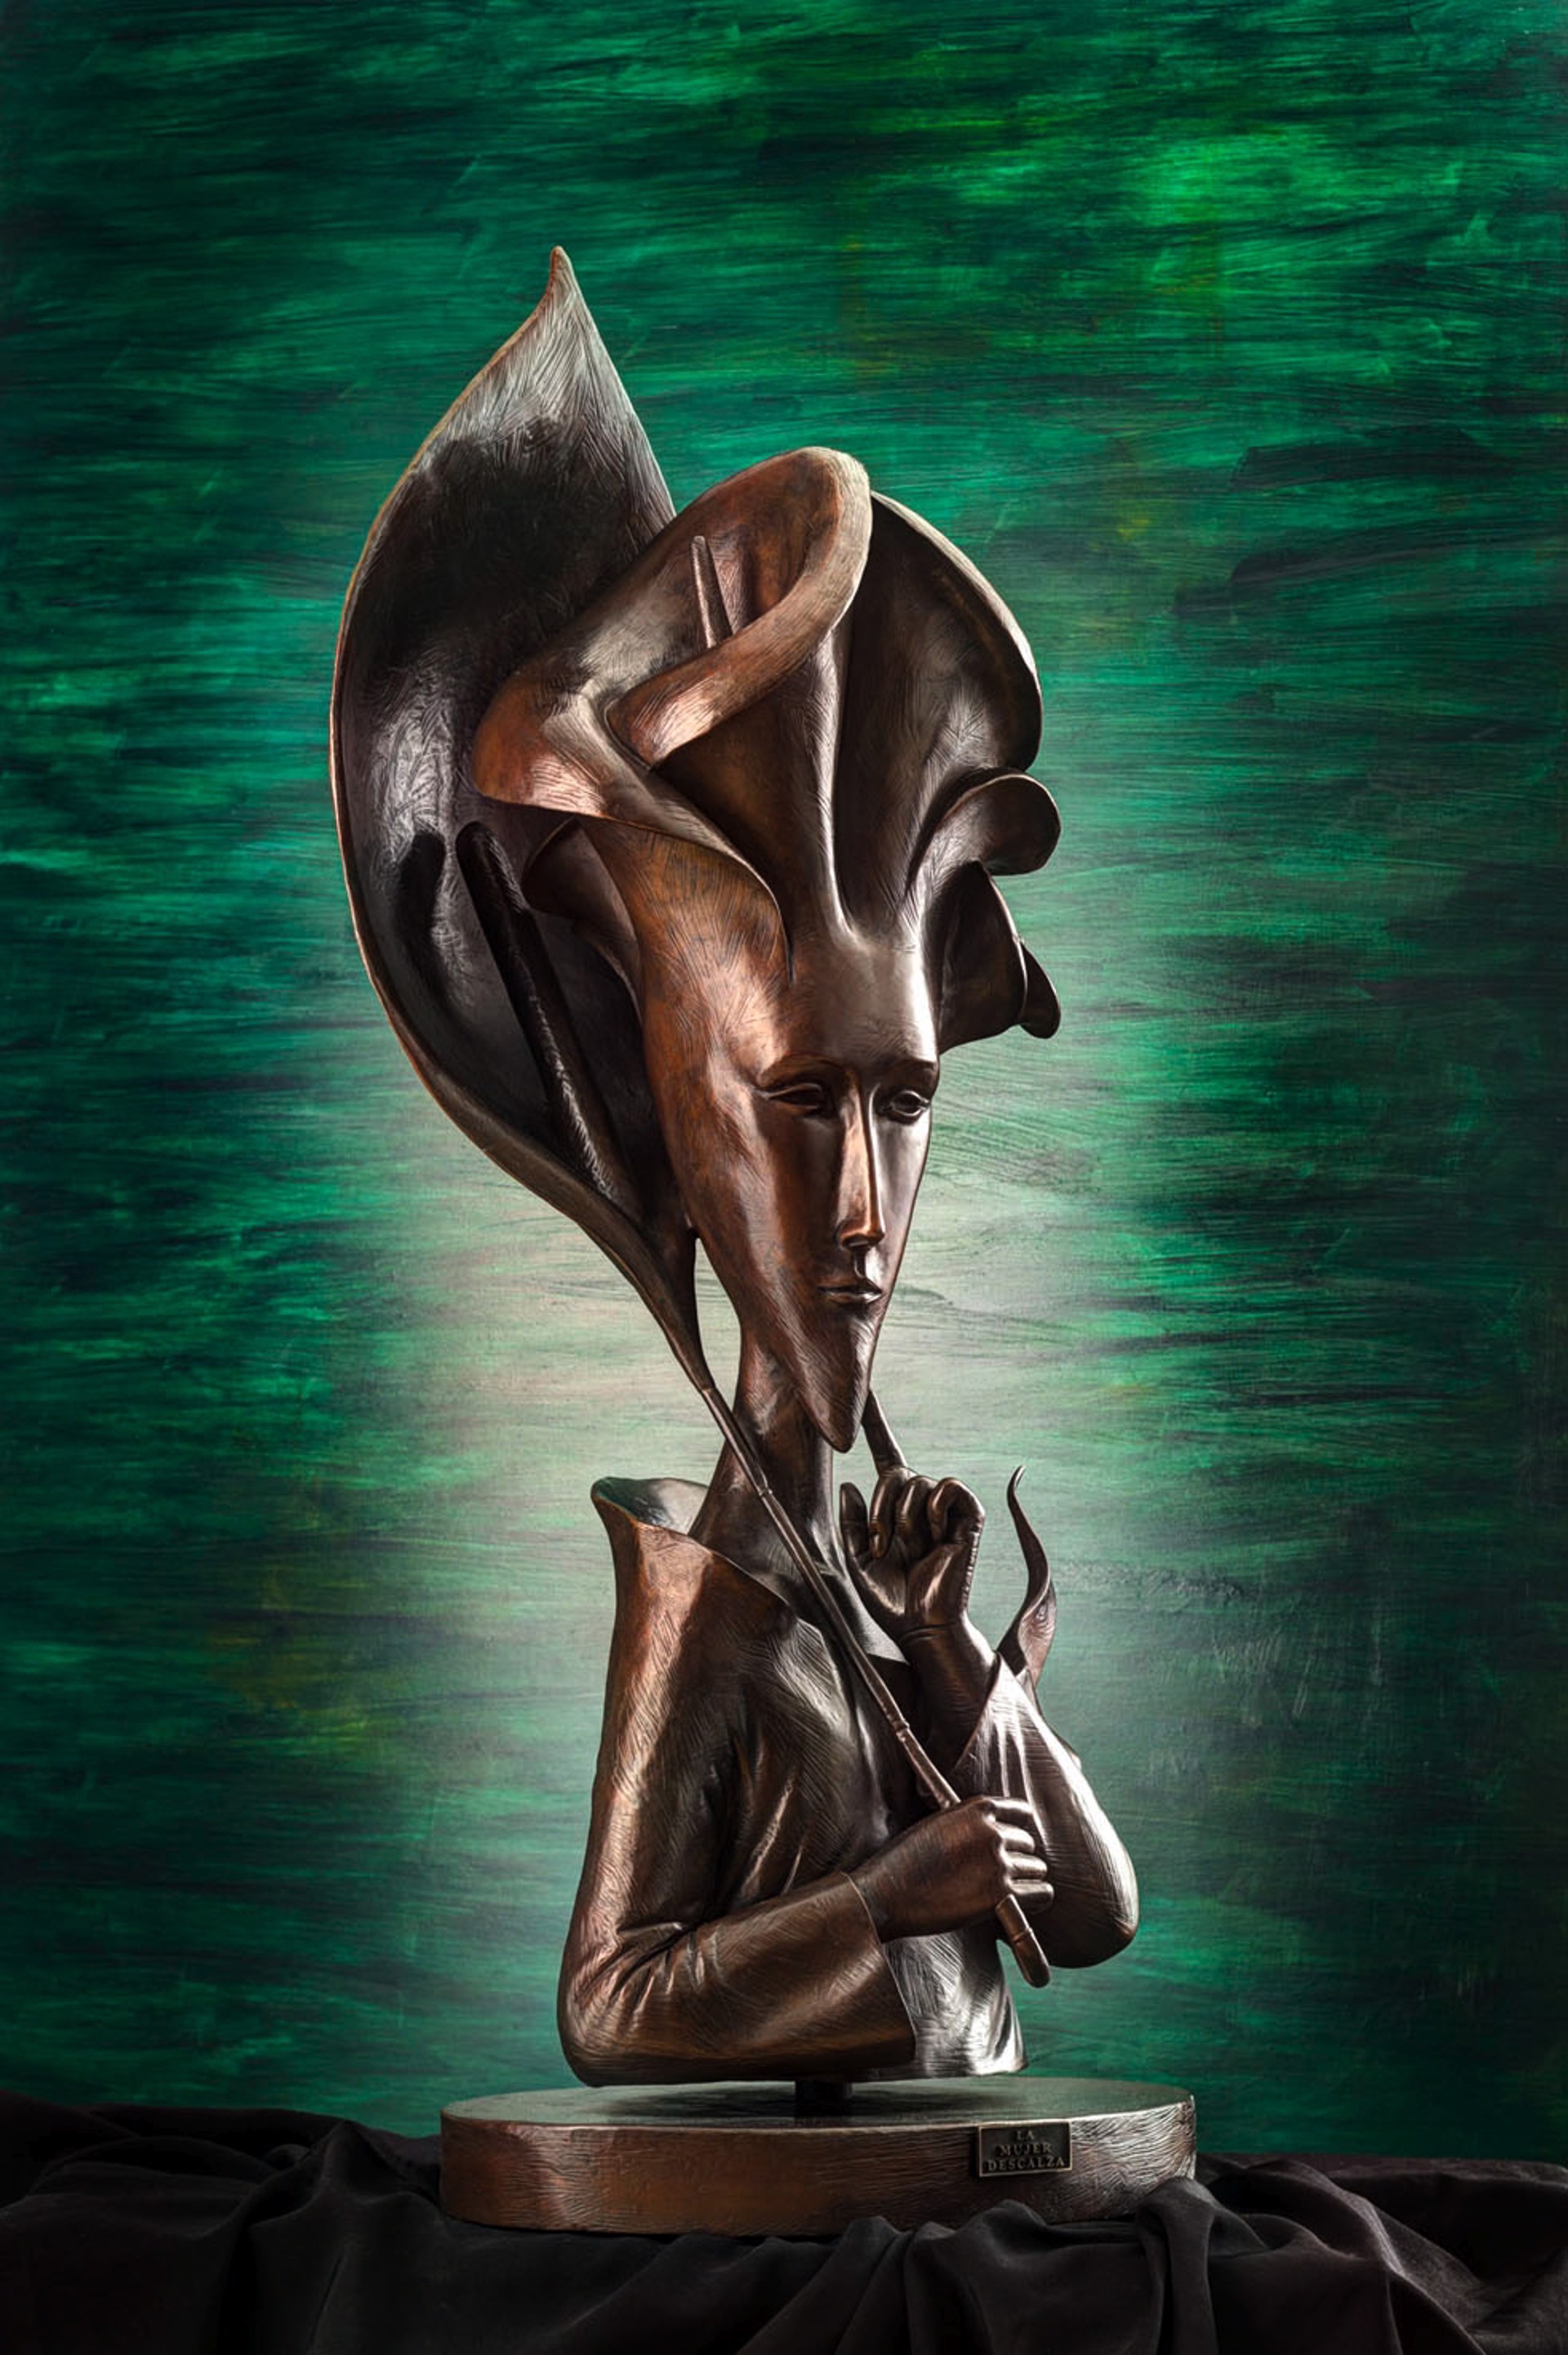 The Barefoot Woman by Sergio Bustamante (sculptor)